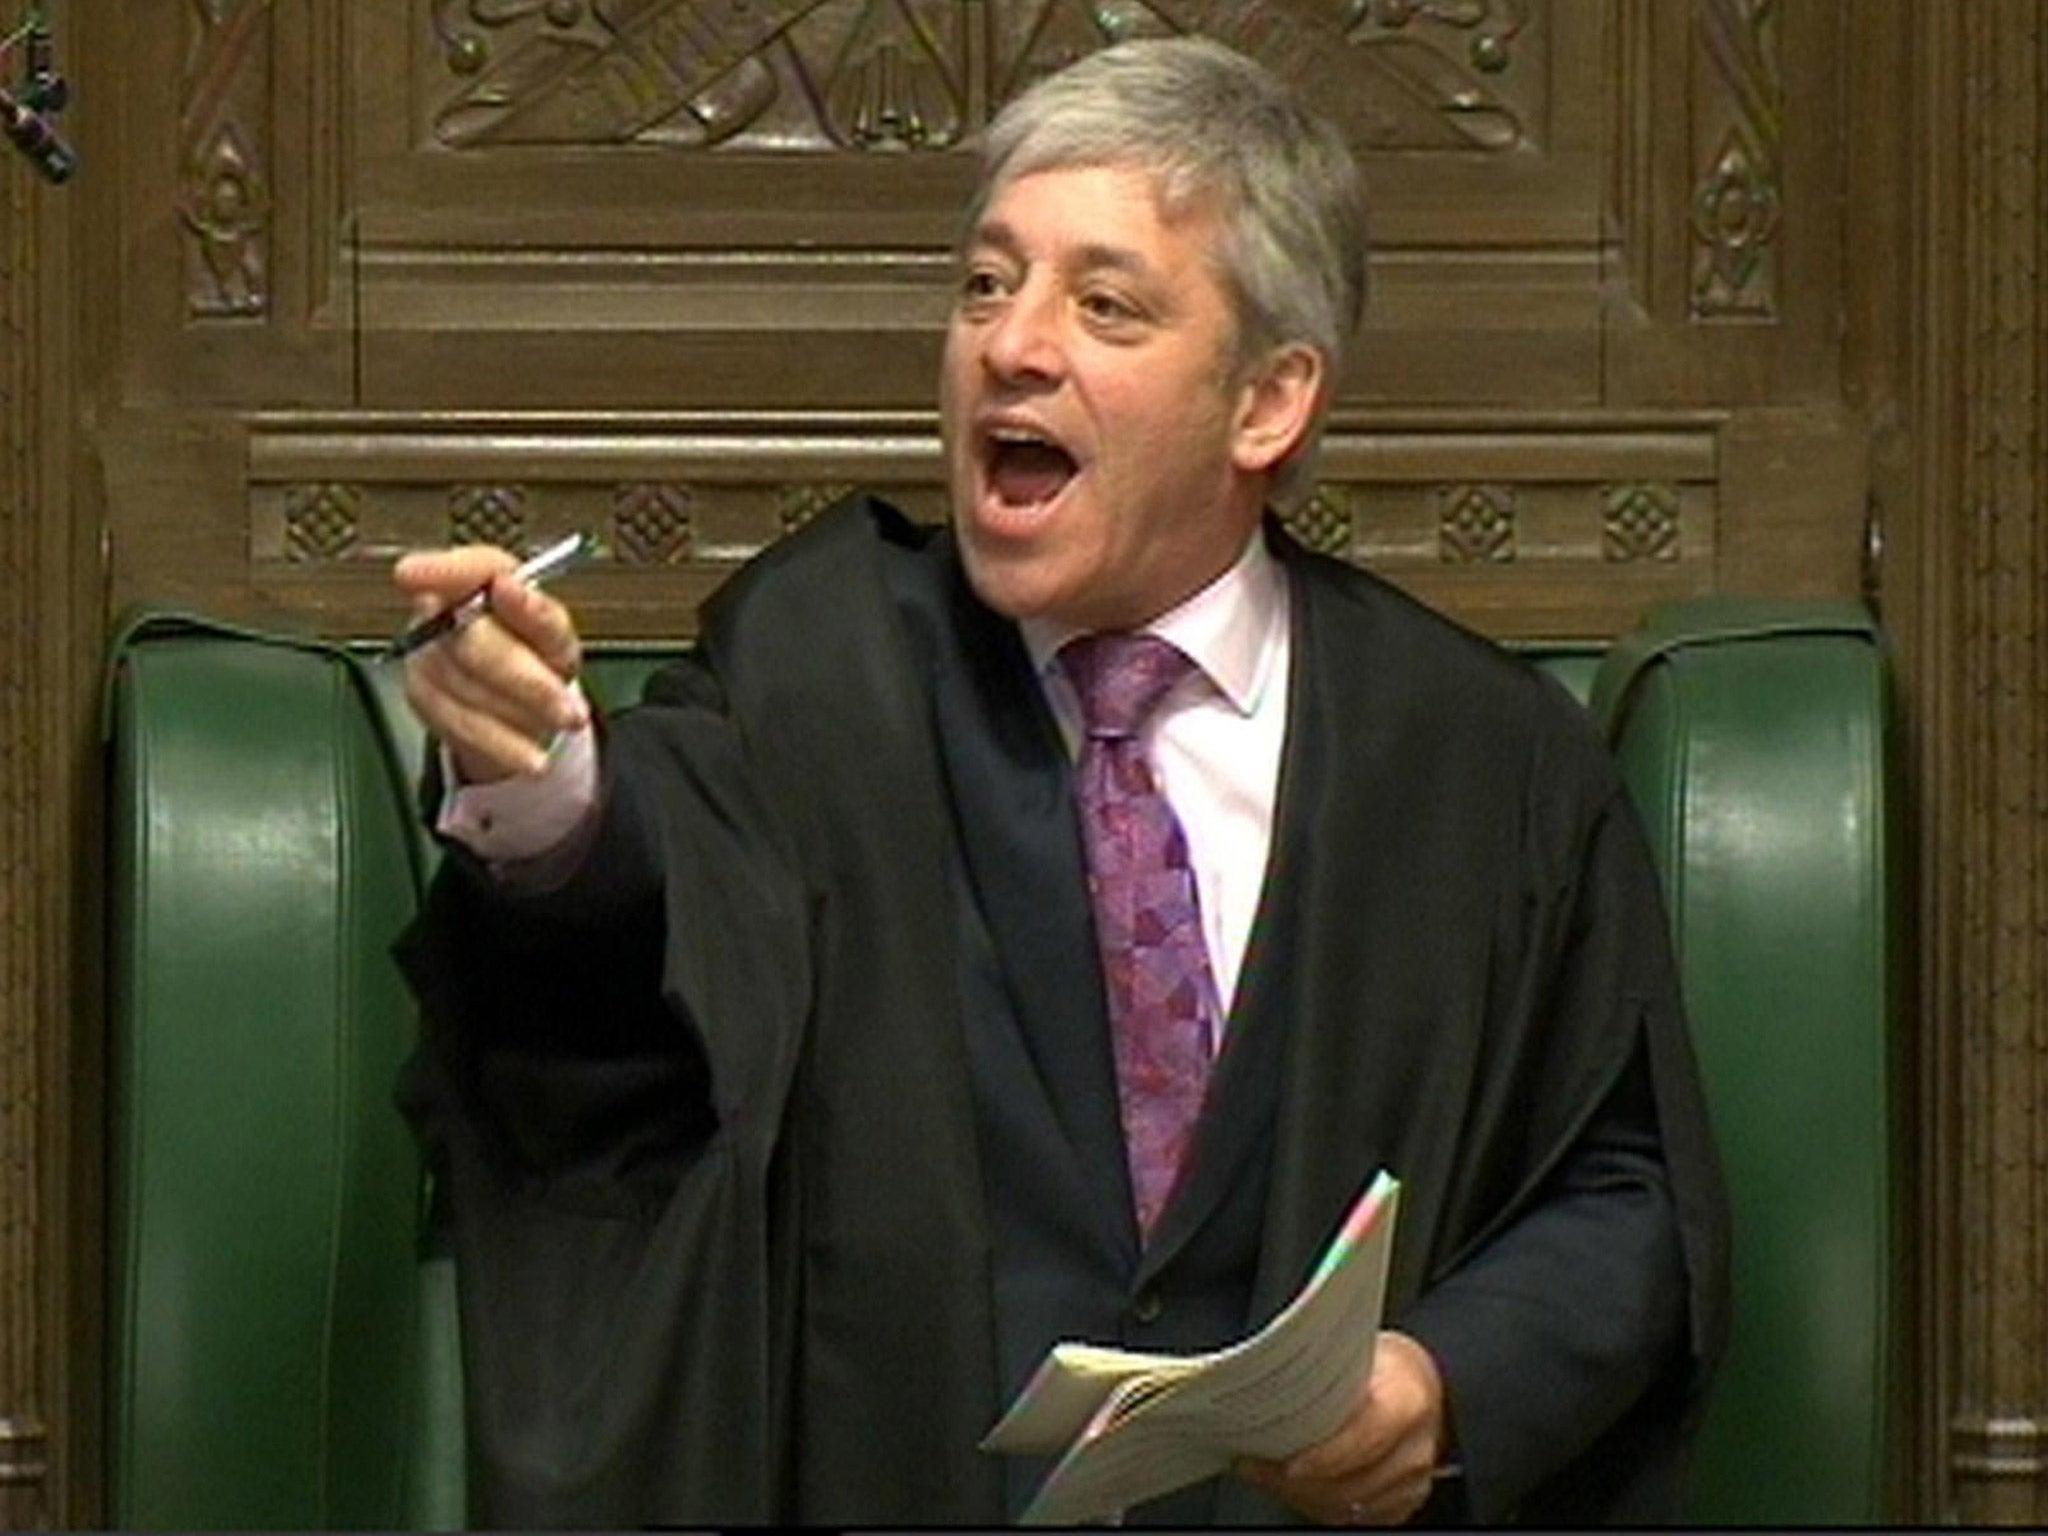 Commons Speaker John Bercow has written to the three main party leaders in a bid to improve PMQs